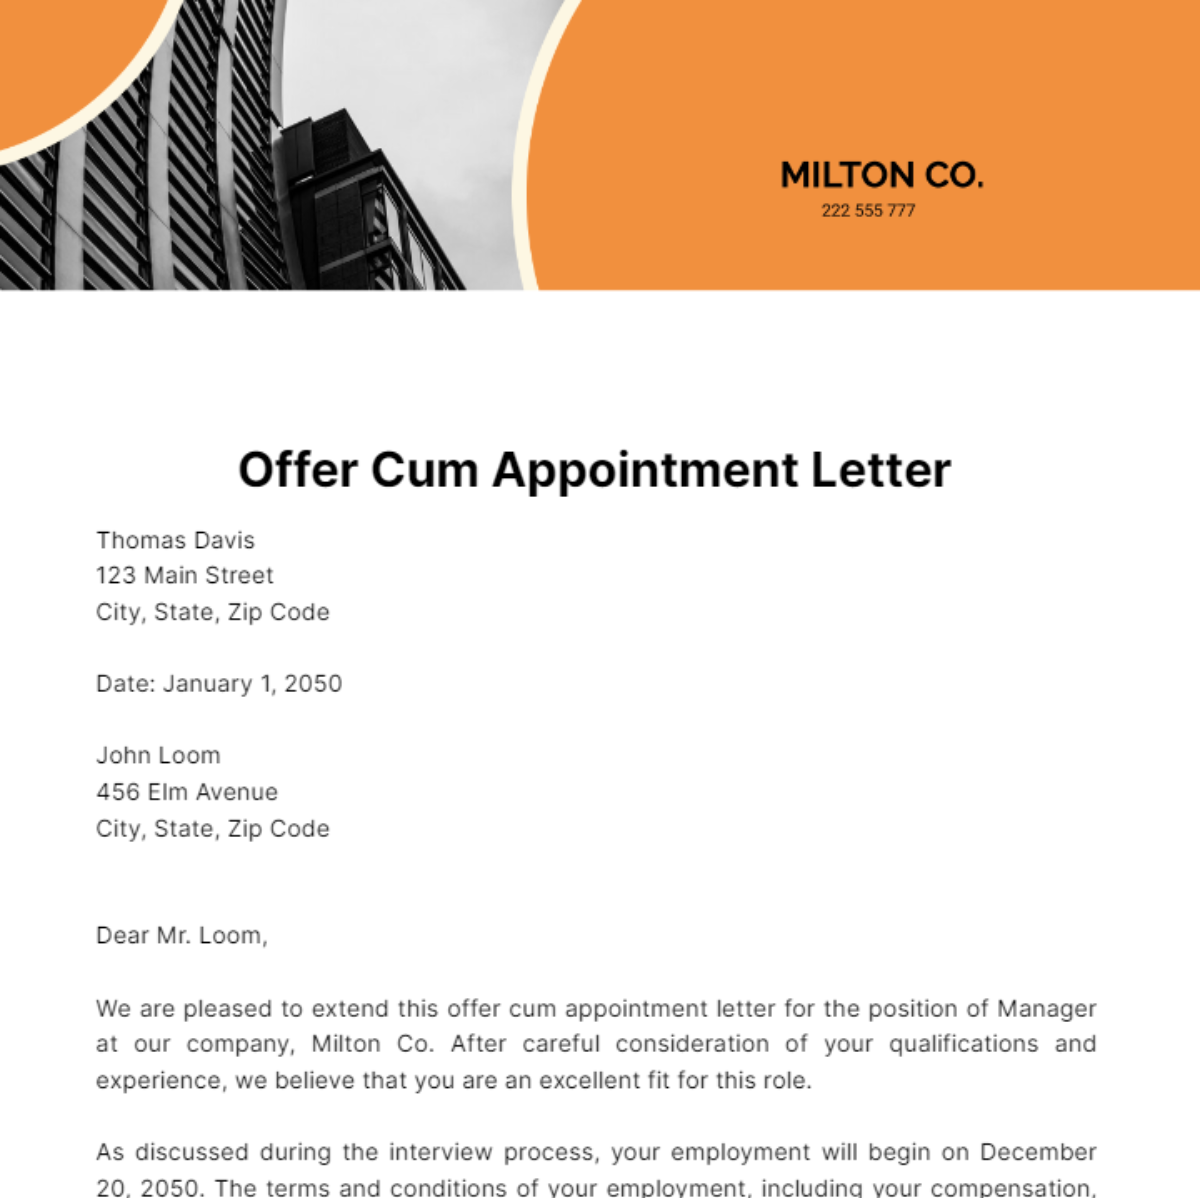 Free Offer Cum Appointment Letter Template